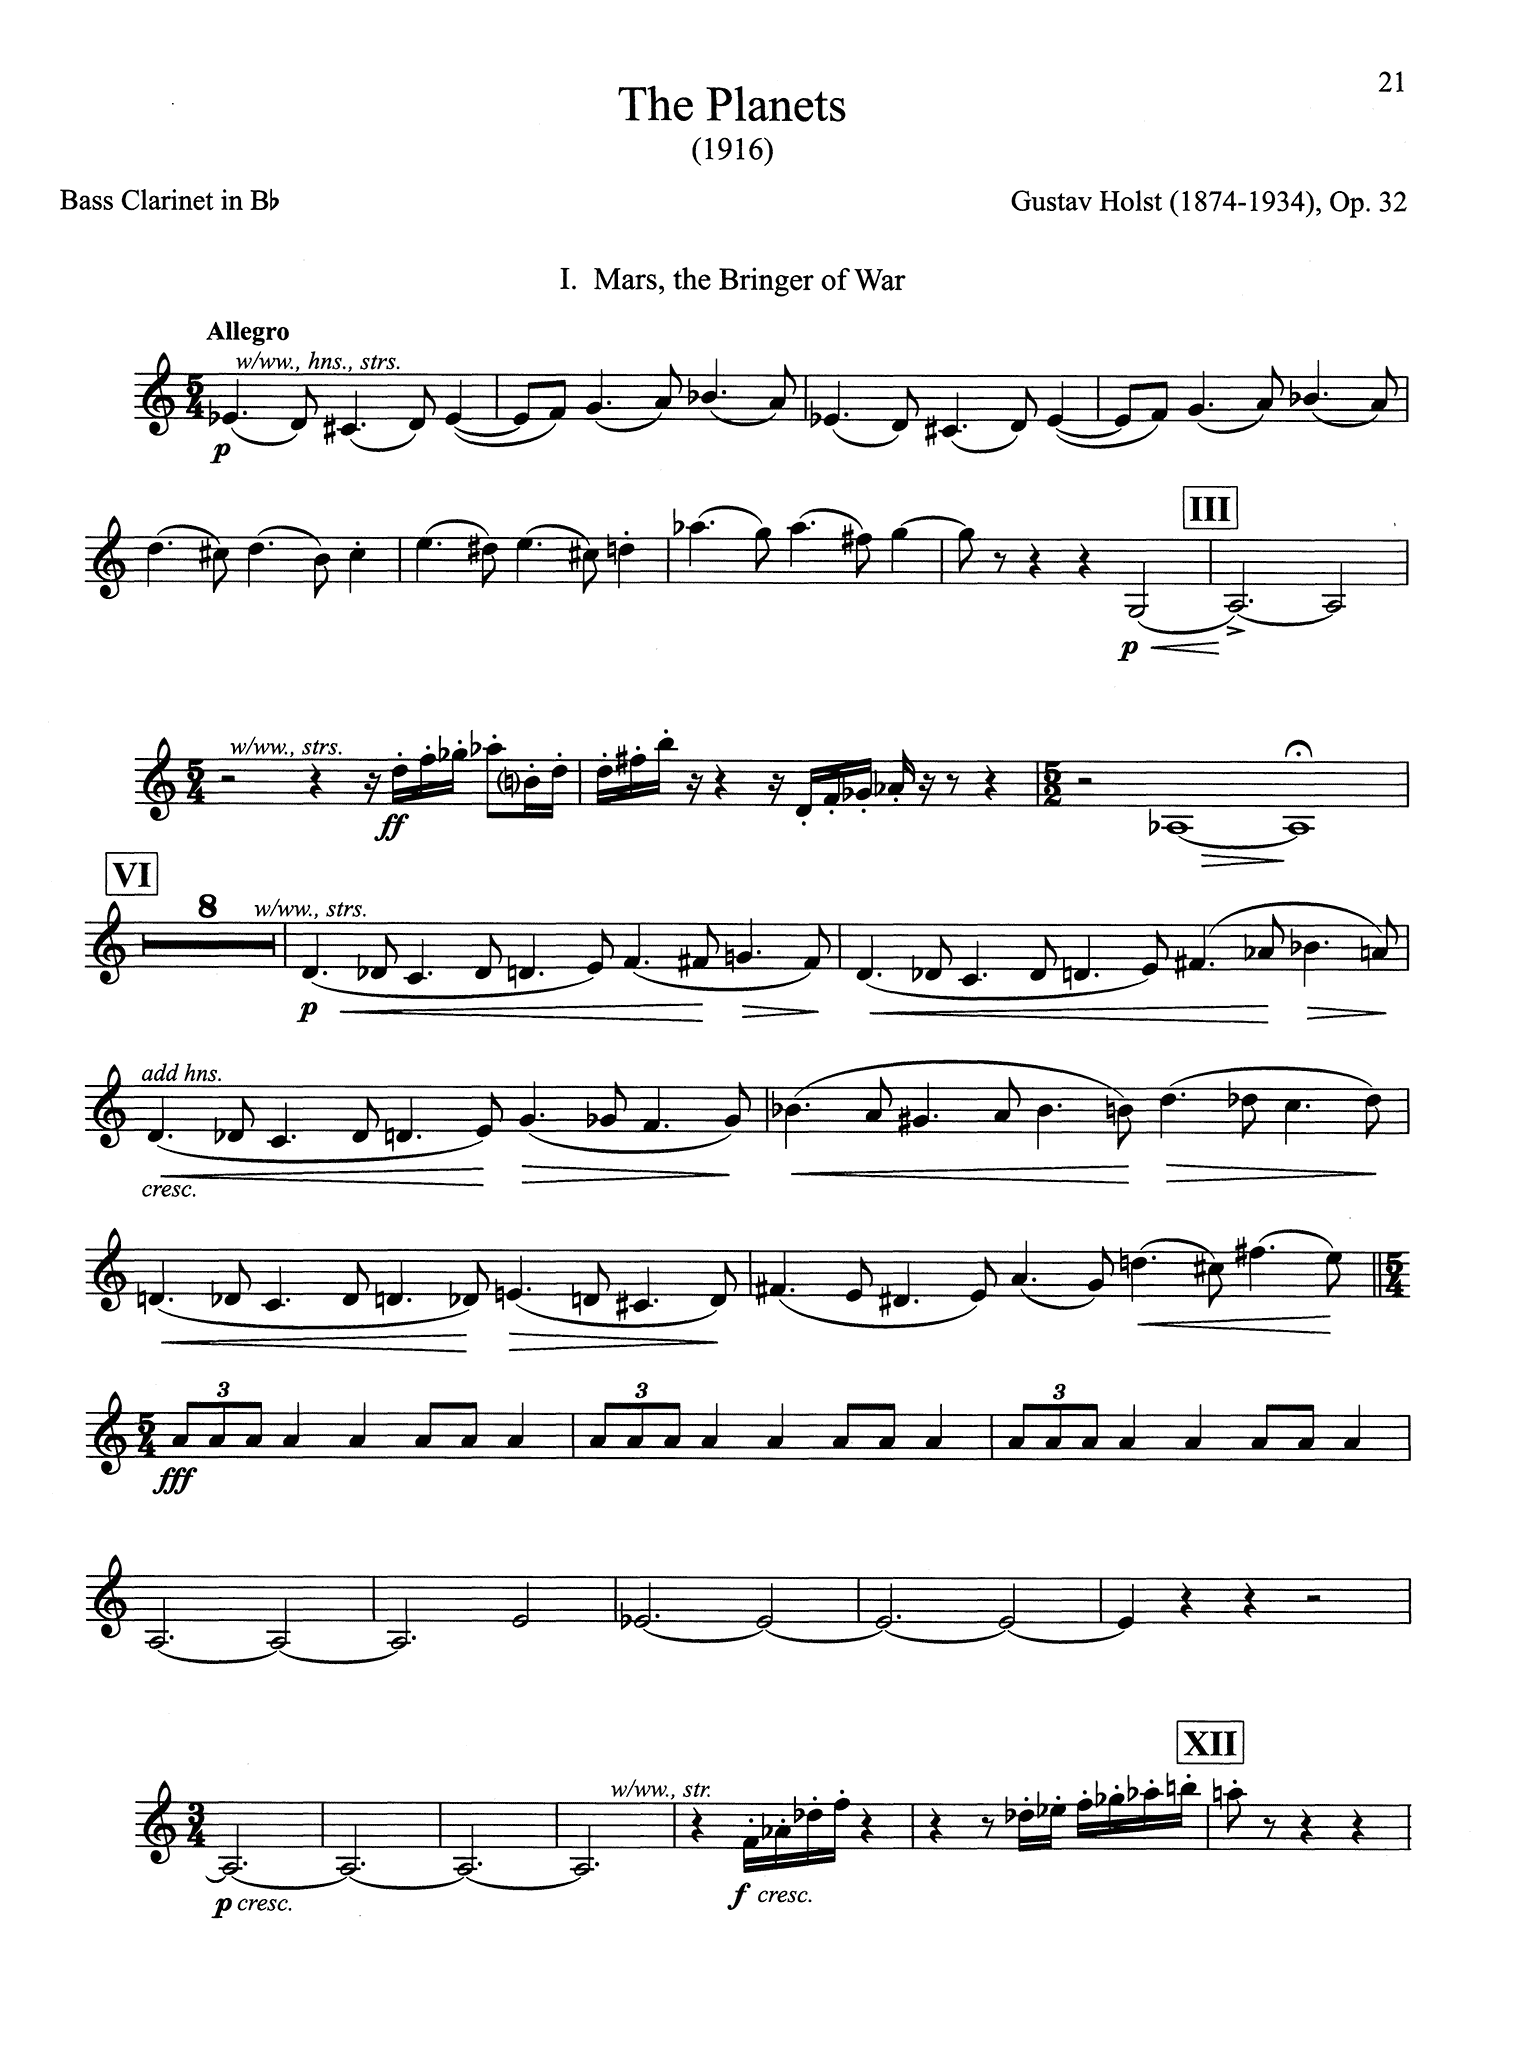 Symphonic Repertoire for the Bass Clarinet, Volume 3 Page 21